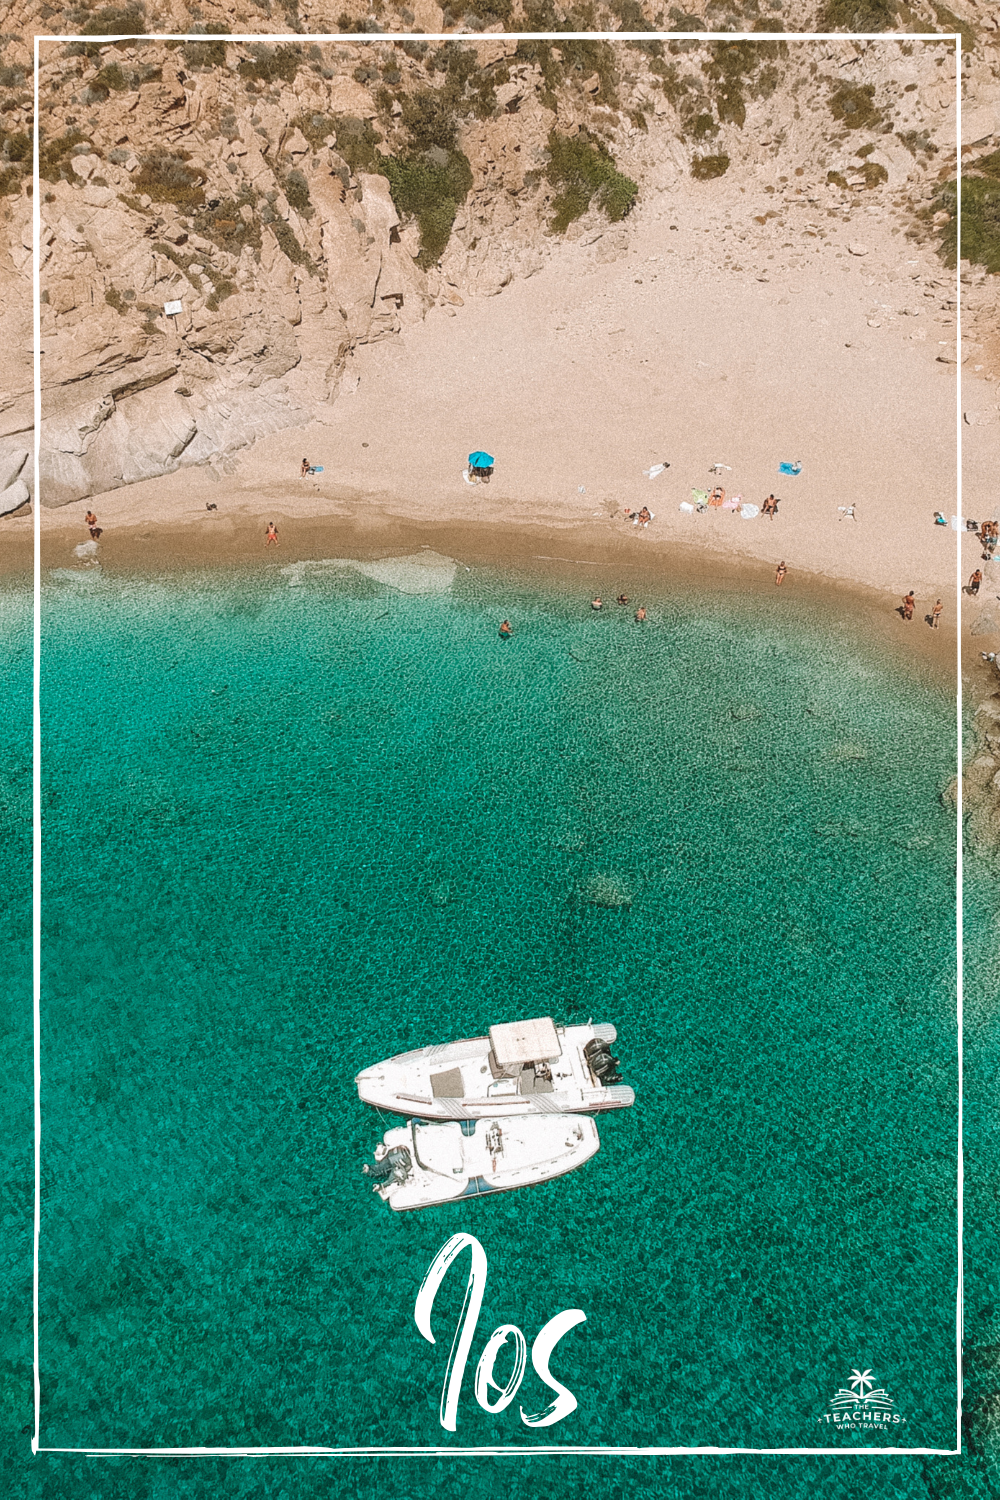 Tripiti beach from the drone. Sandy beach with turquoise water. Things to do in Ios. Pinterest link